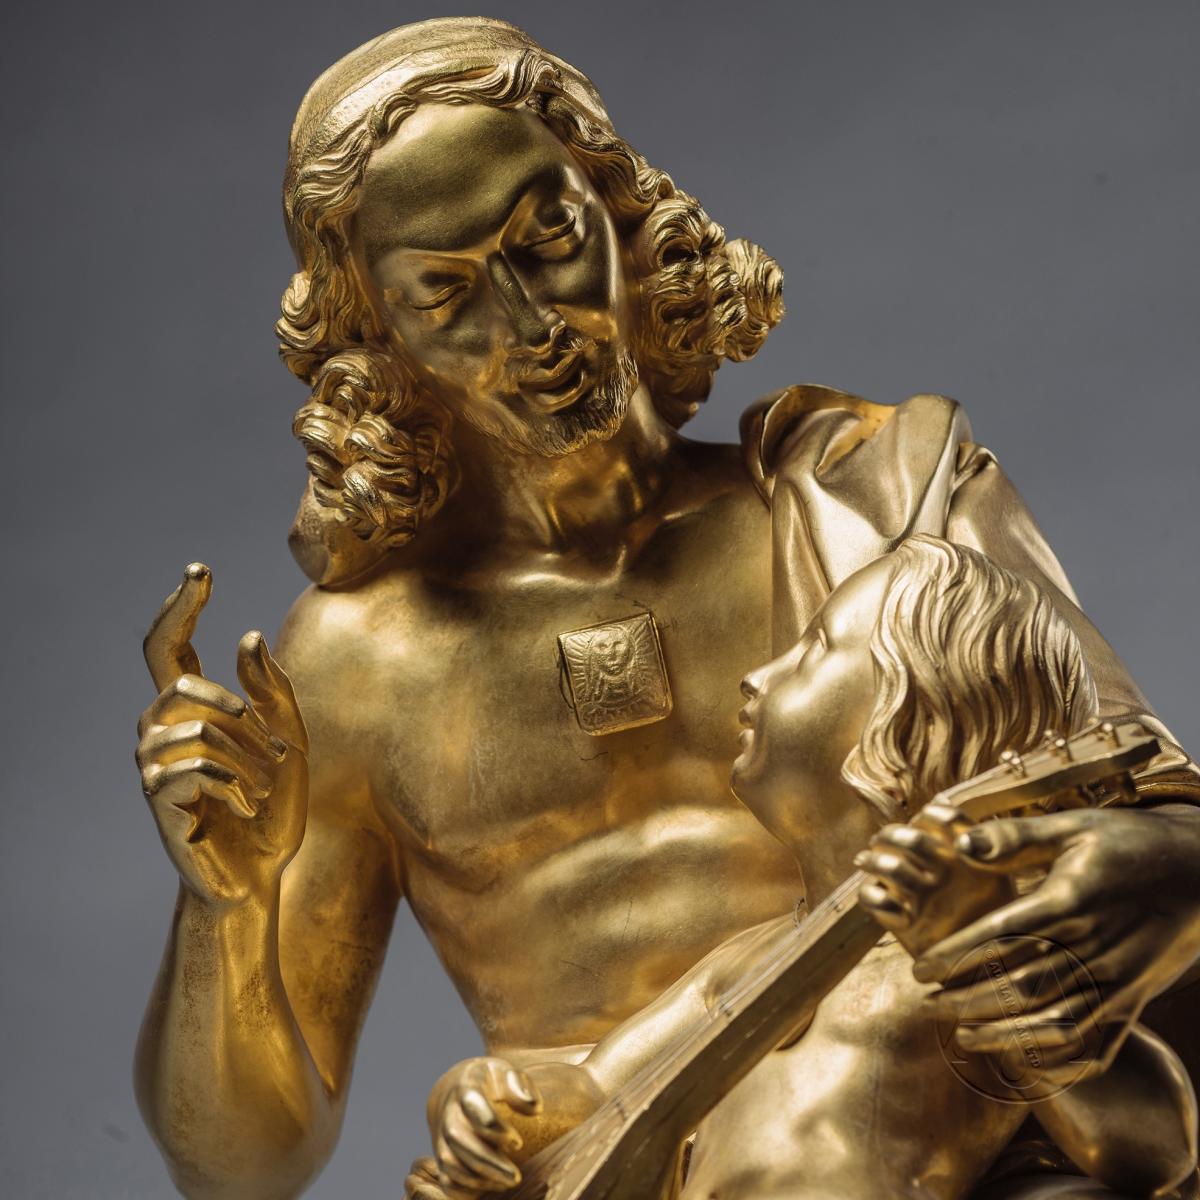 An Exceptional Pair of Restoration Period Gilt-Bronze Allegorical Groups Depicting Music and Wine